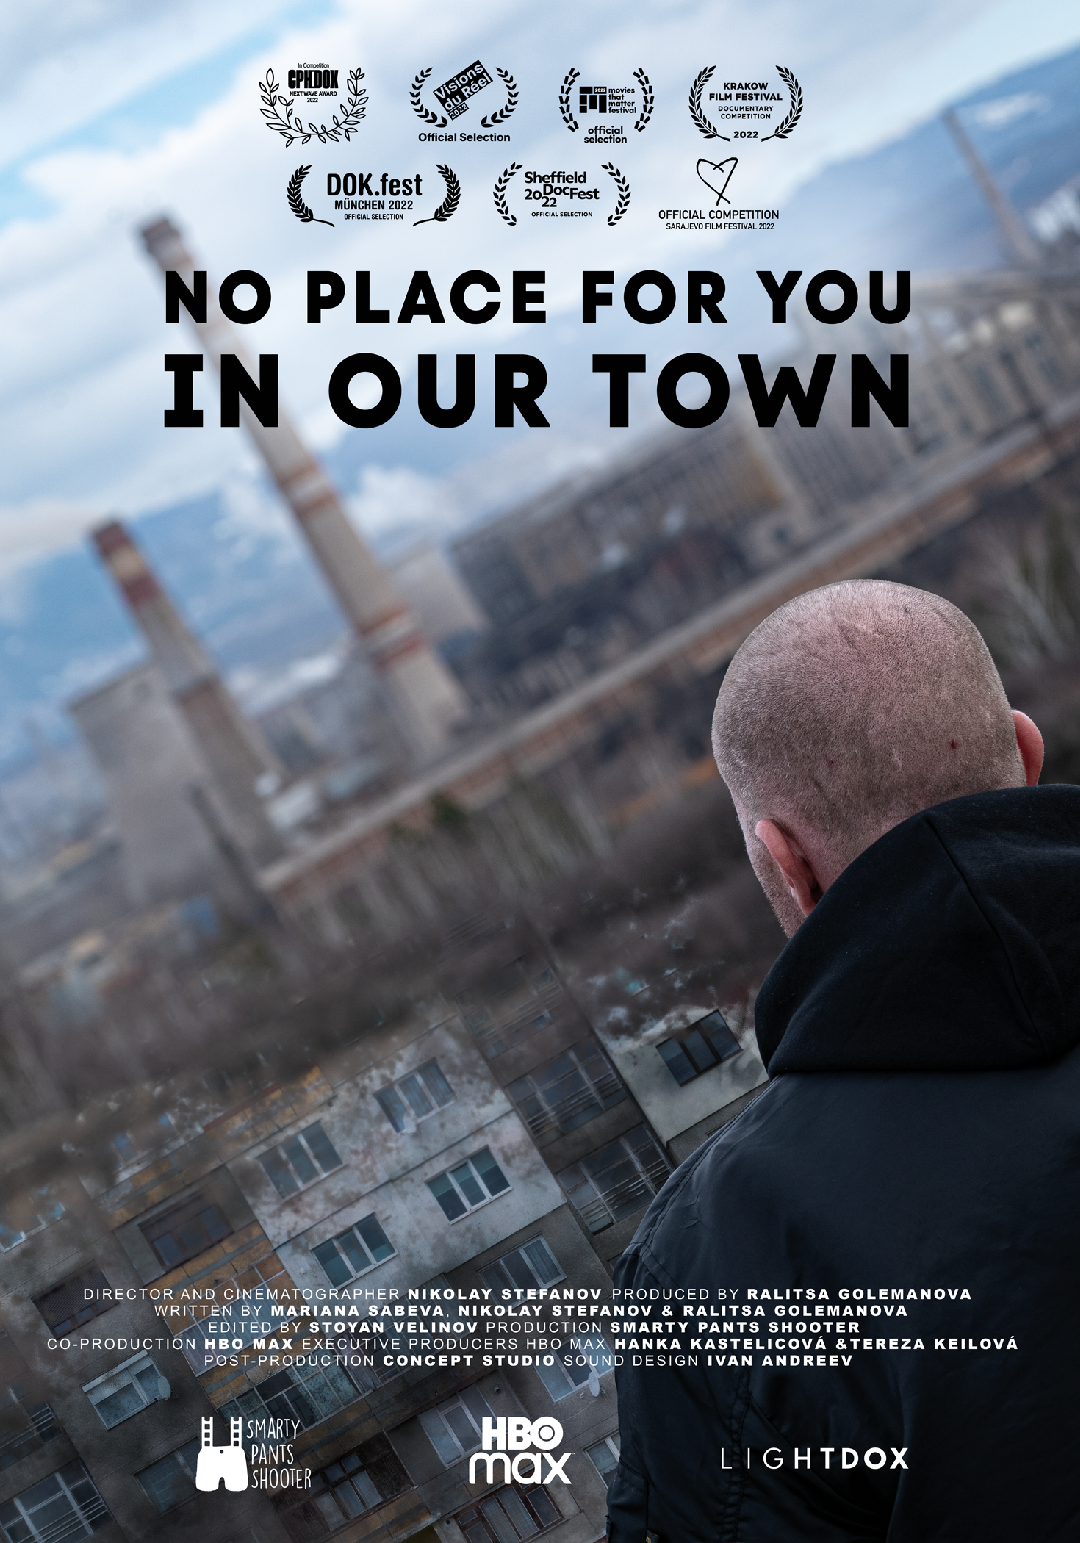 No Place for You in Our Town, por día, 17 docsmx